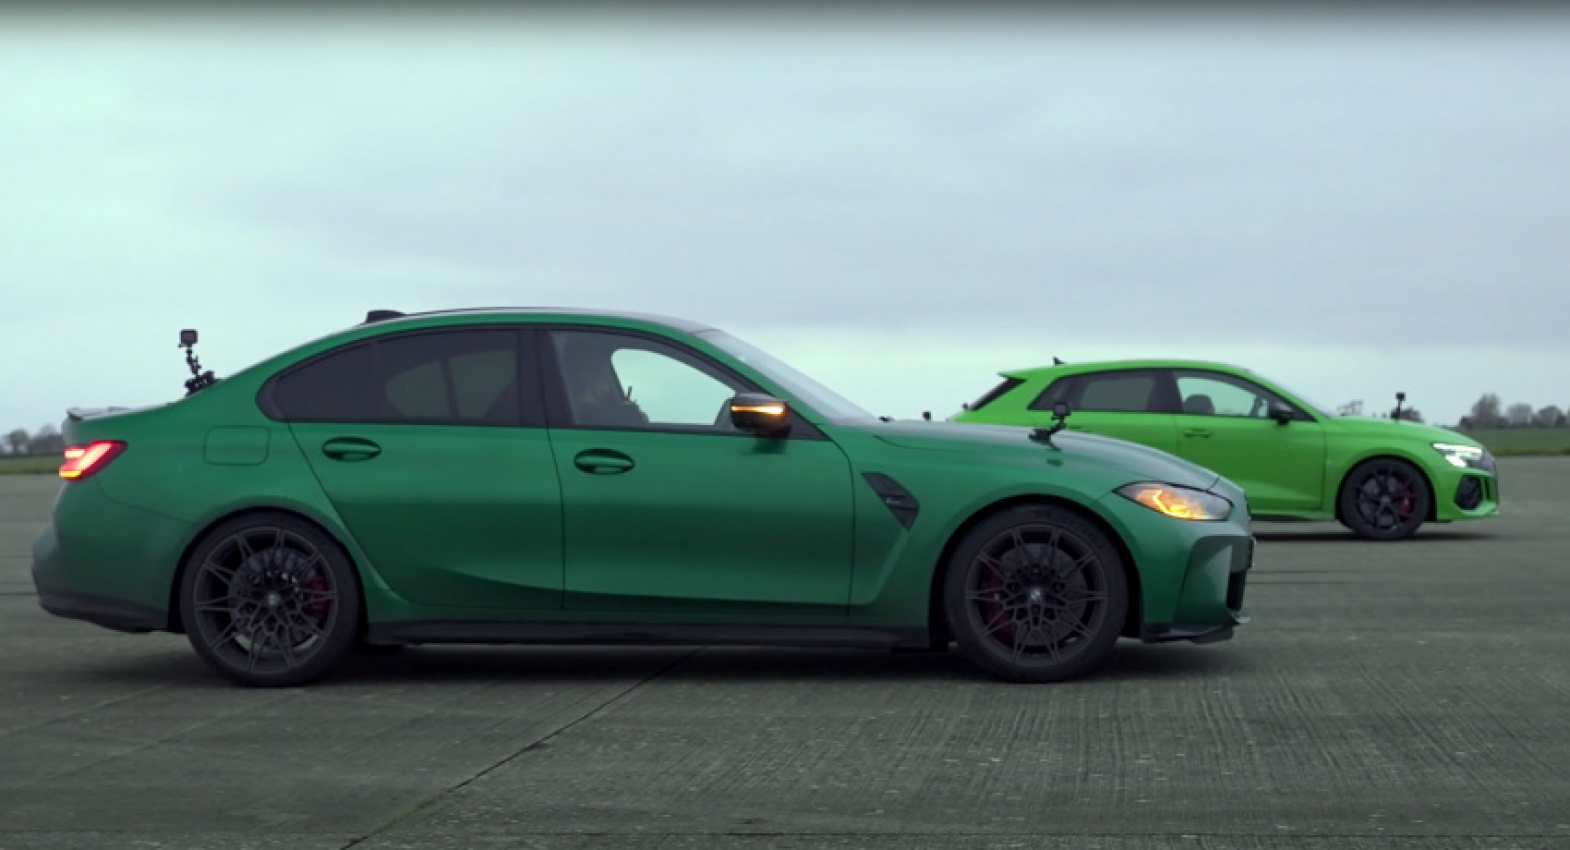 audi, autos, bmw, cars, news, audi rs3, audi sport, audi videos, bmw m3, bmw videos, drag racing, video, can the new audi rs3 match the bmw m3 on a straight line?